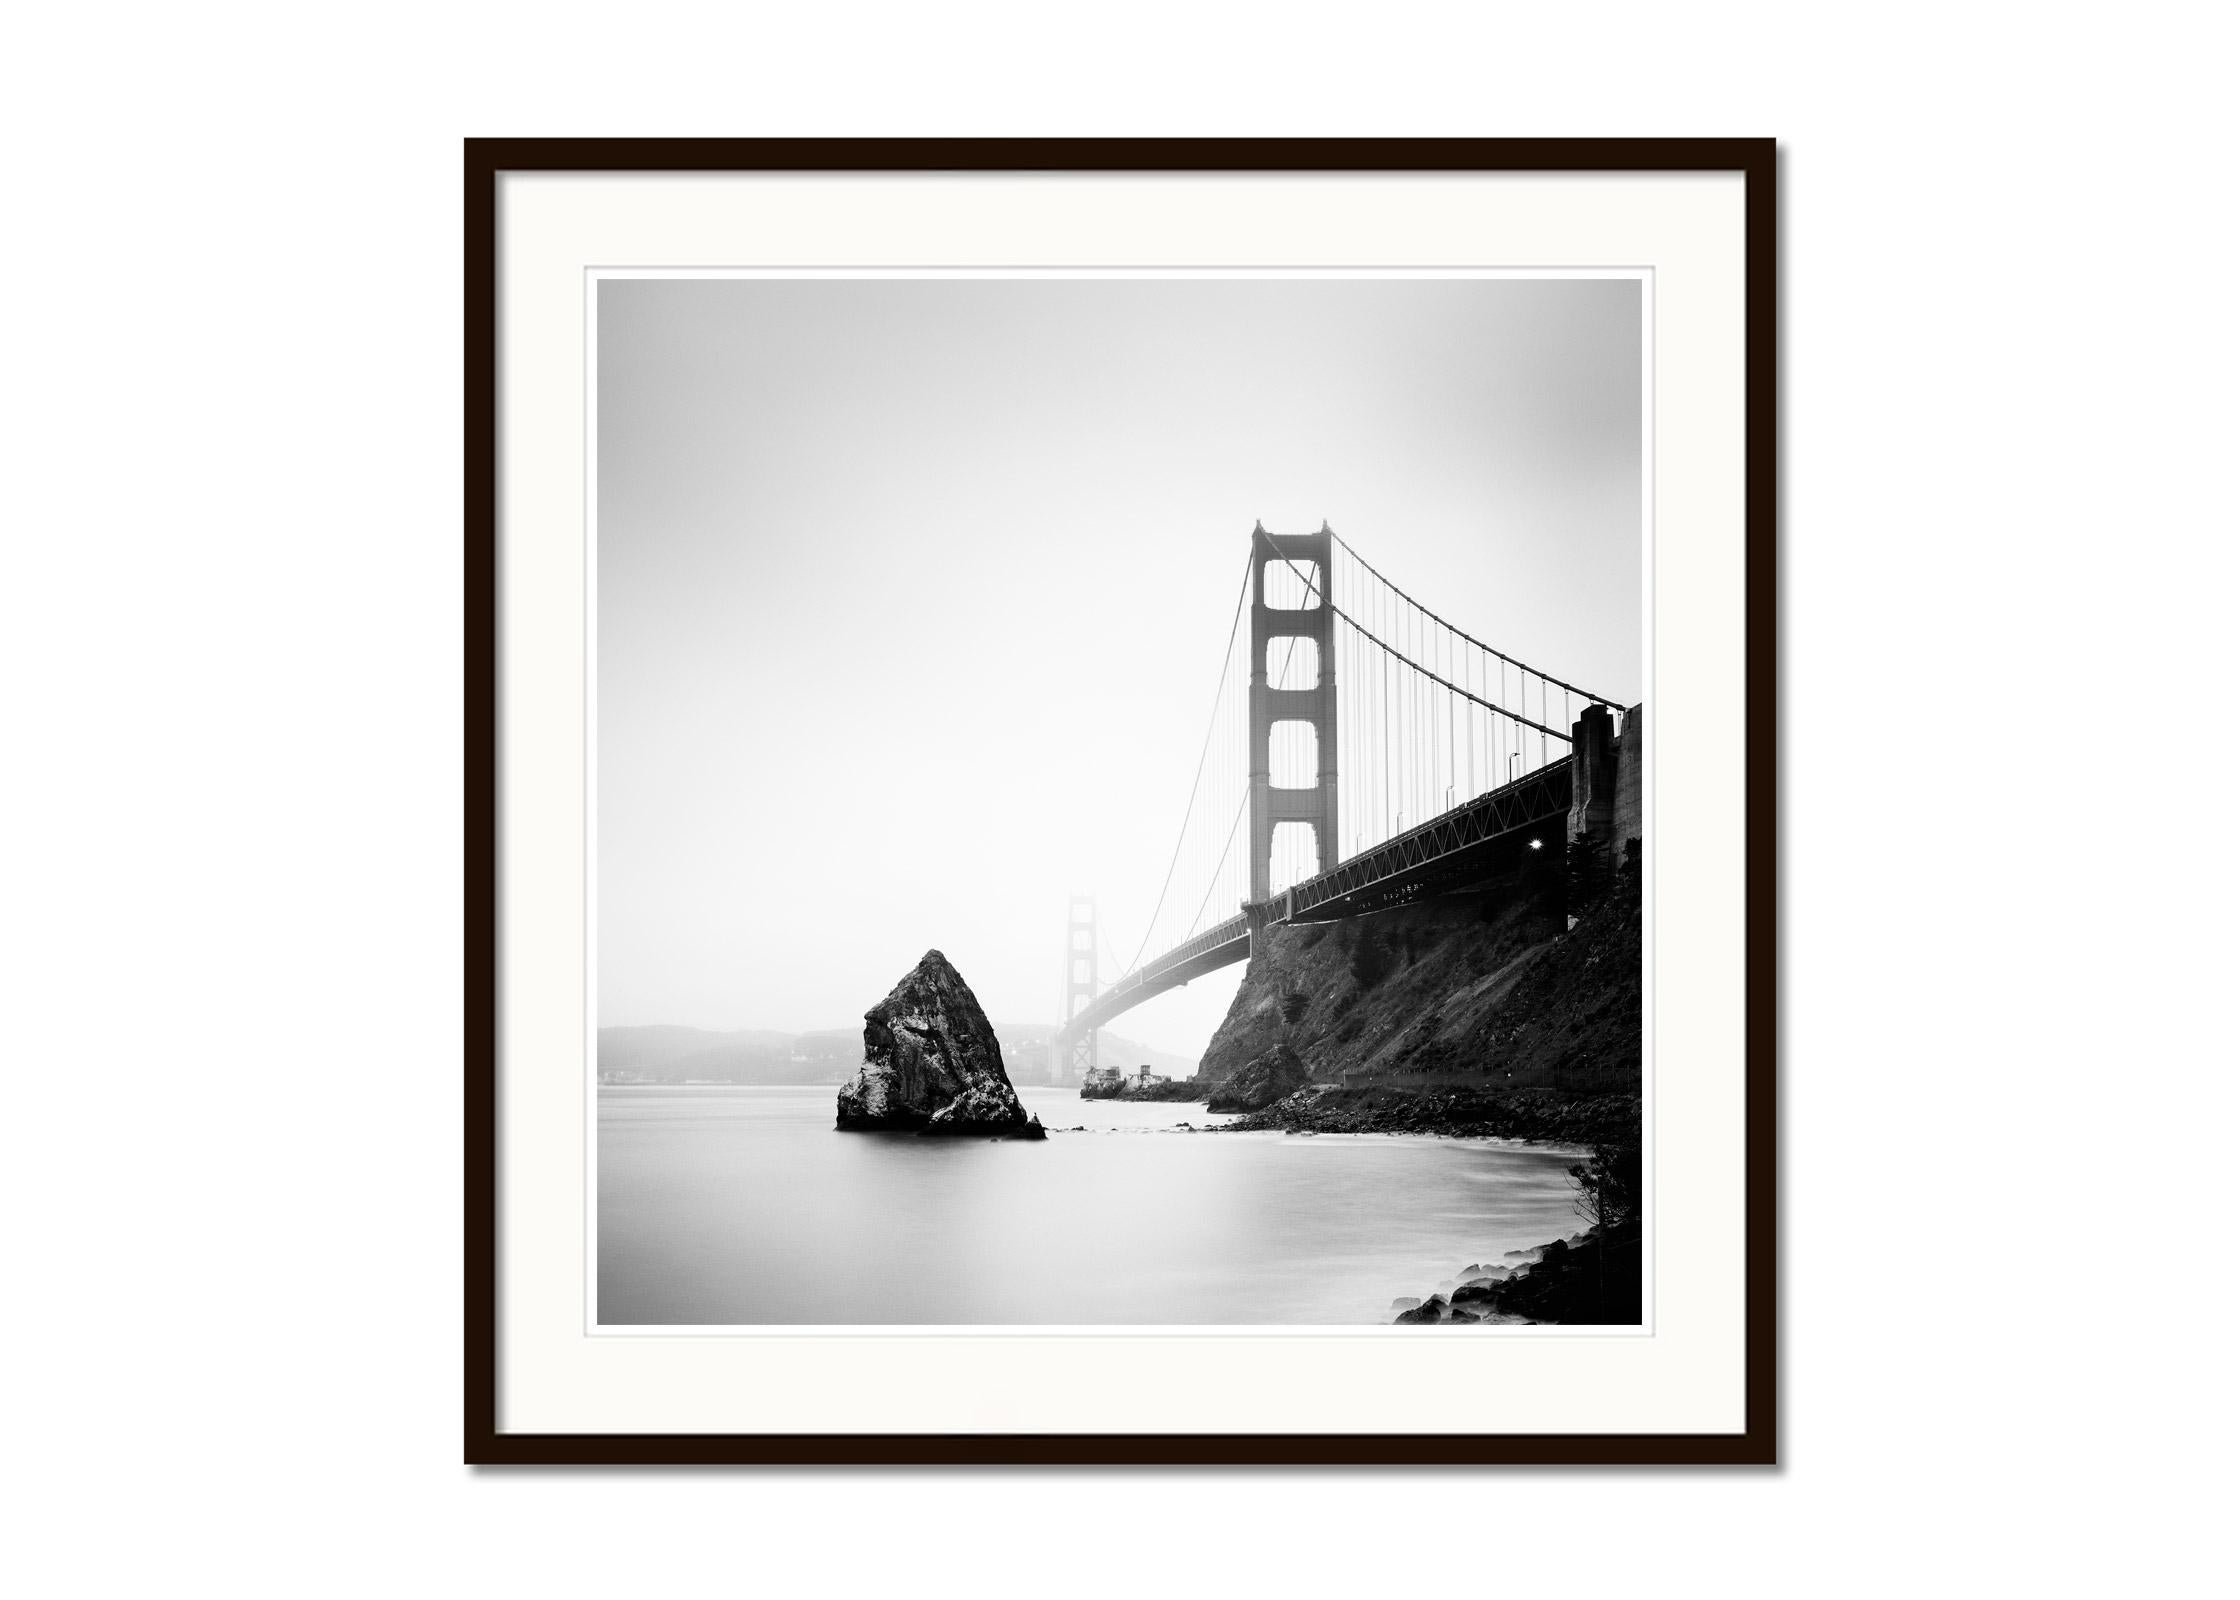 Golden Gate Bridge, fort point rock, San Francisco, b&w landscape photography - Gray Black and White Photograph by Gerald Berghammer